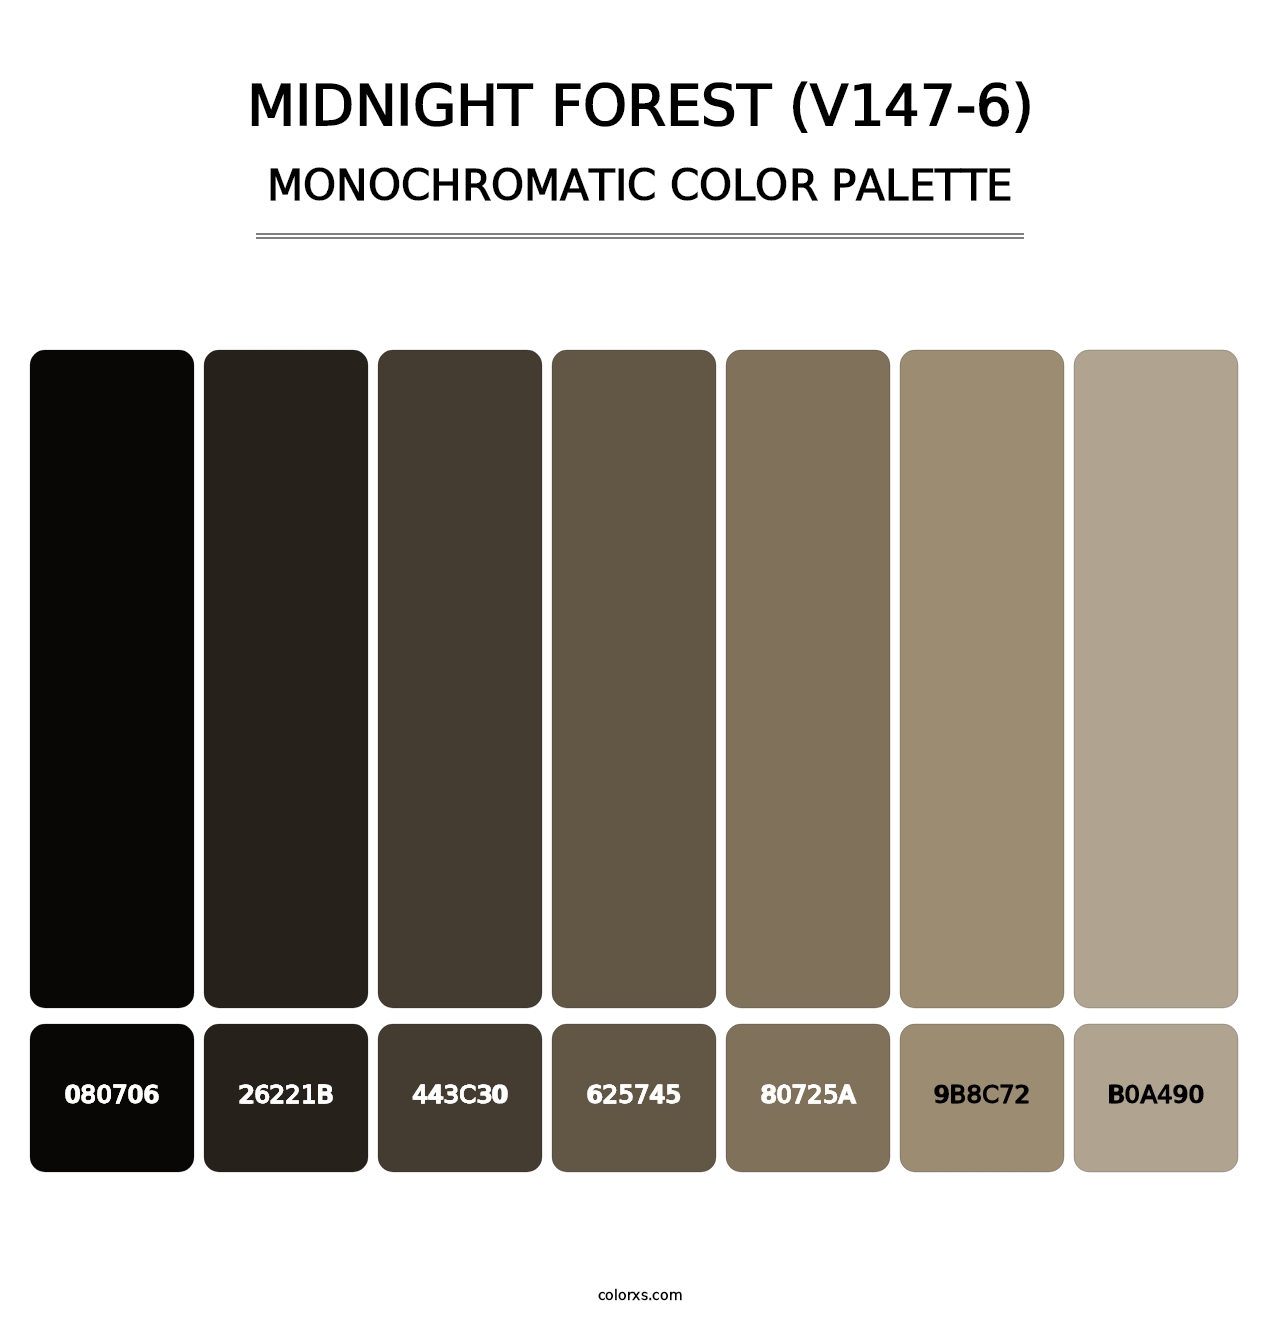 Midnight Forest (V147-6) - Monochromatic Color Palette